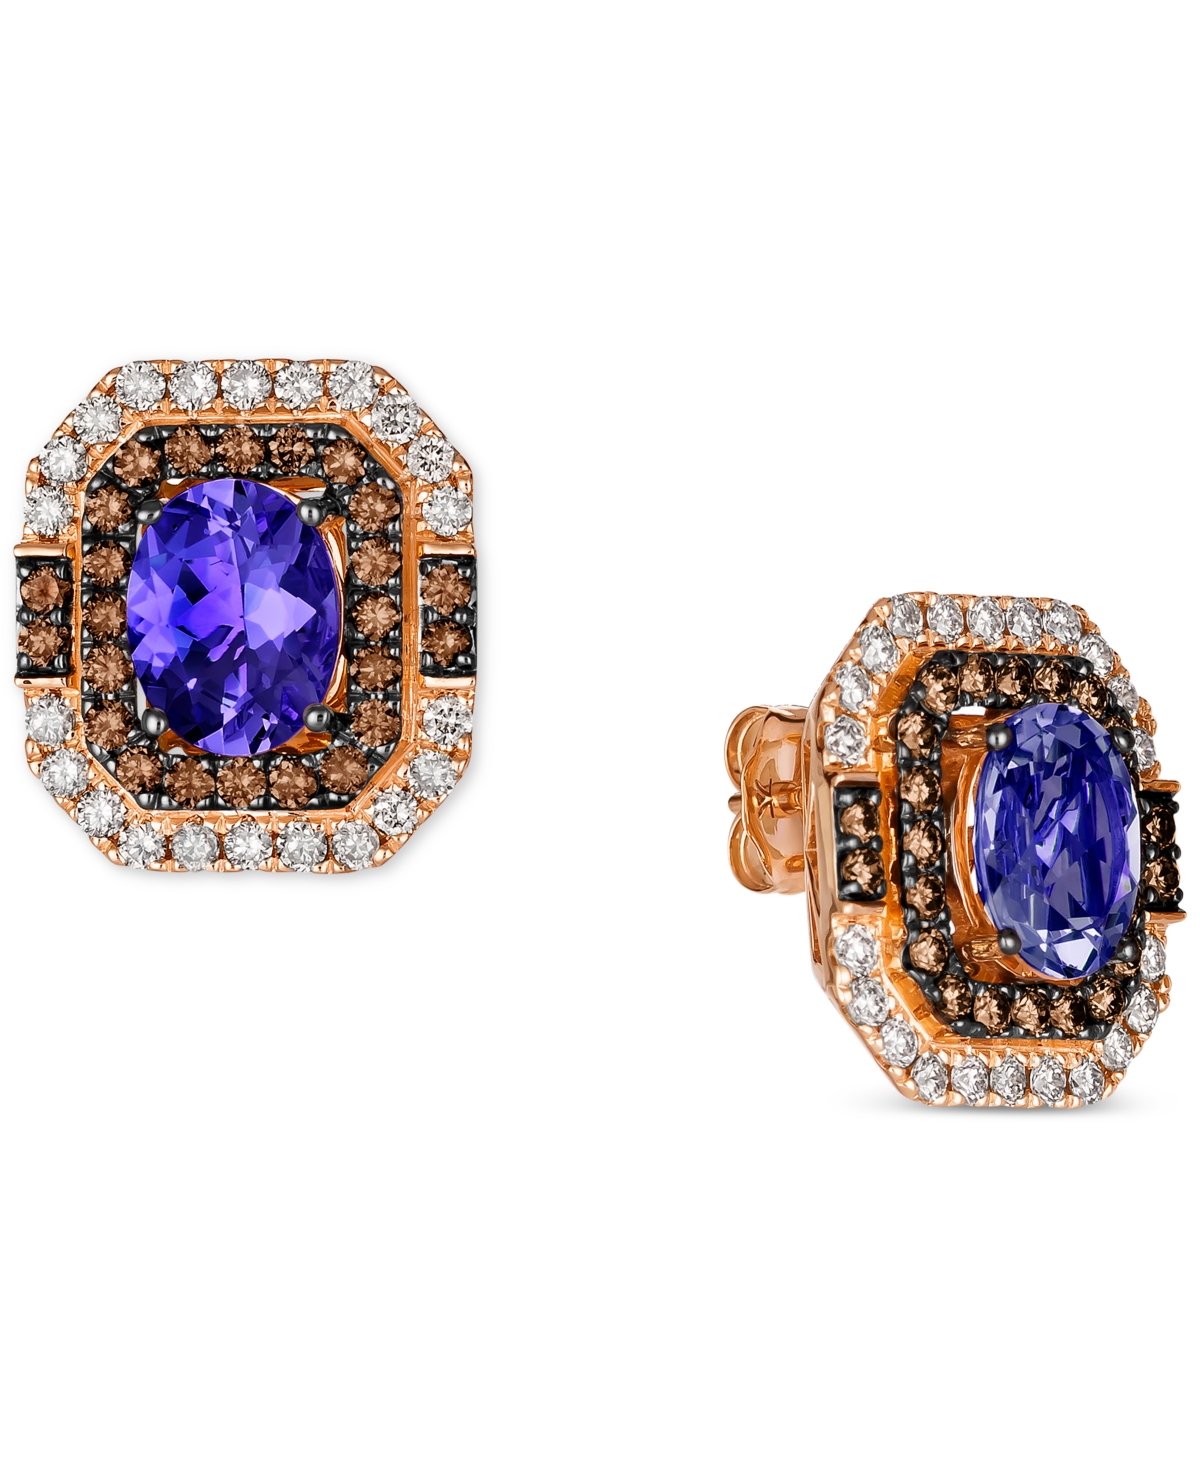 Le Vian Blueberry Tanzanite (3-3/8 ct. t.w.), Chocolate Diamonds (7/8 ct. t.w.) & Nude Diamonds (3/4 ct. t.w.) Earrings in 14k Rose Gold